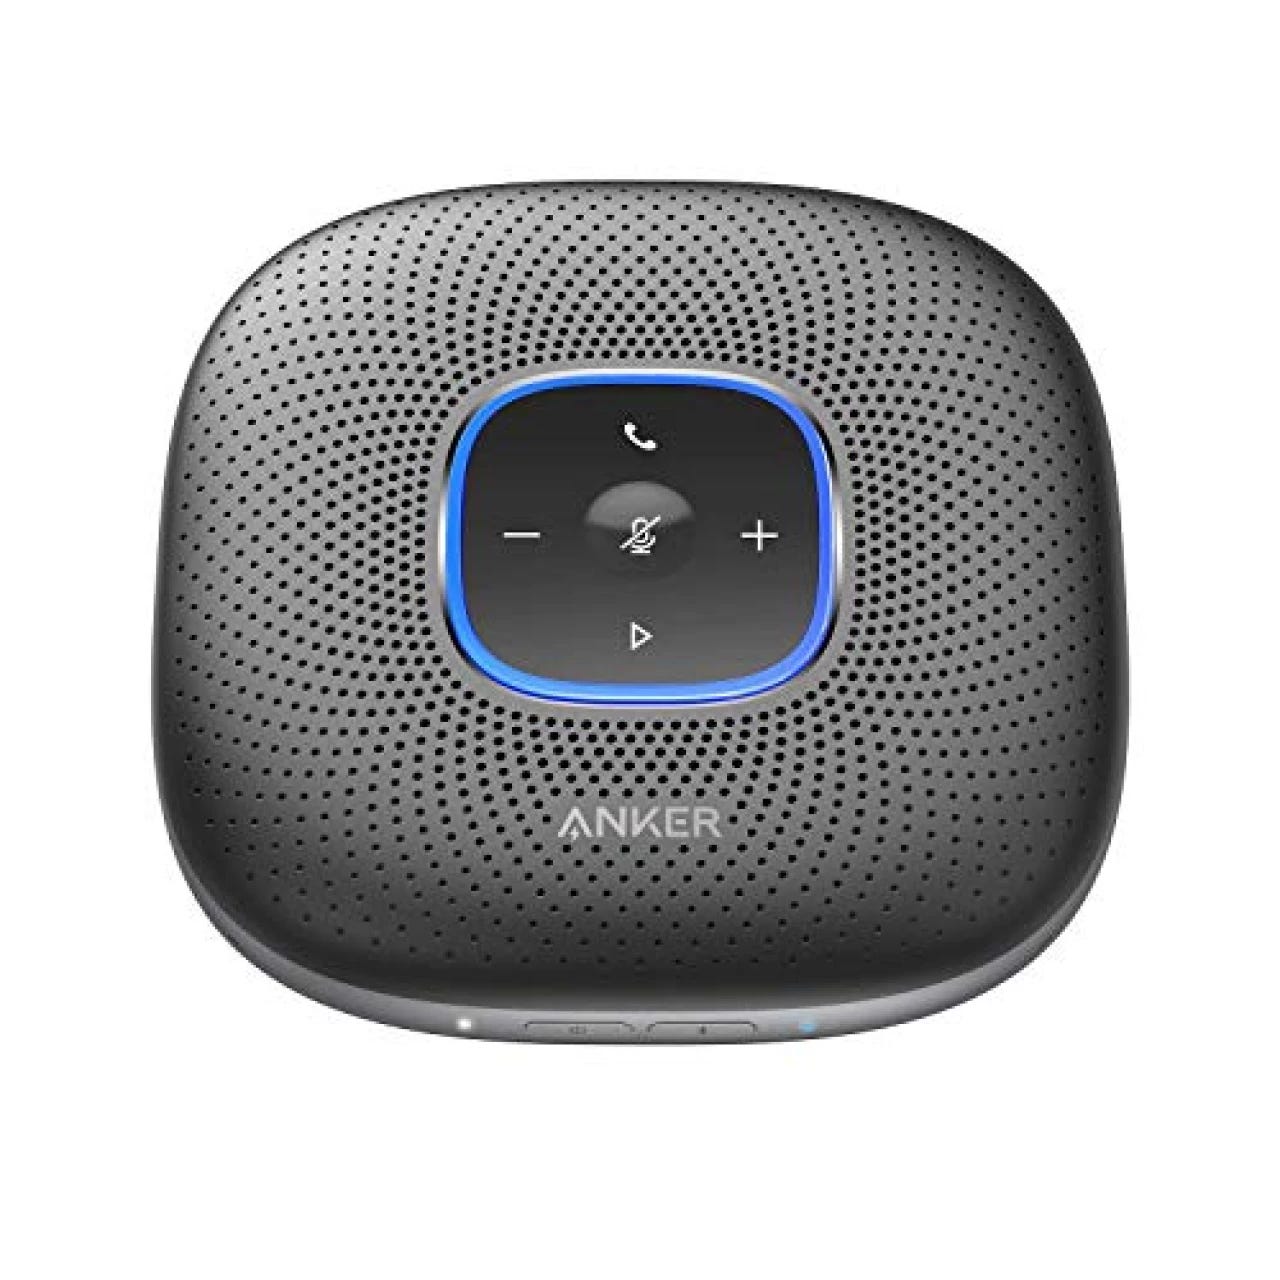 EMEET Conference Speaker and Microphone Luna 360° Voice Pickup w/Noise  Reduction/Mute/Indicator USB Bluetooth Speakerphone w/Dongle for 8 People  Daisy